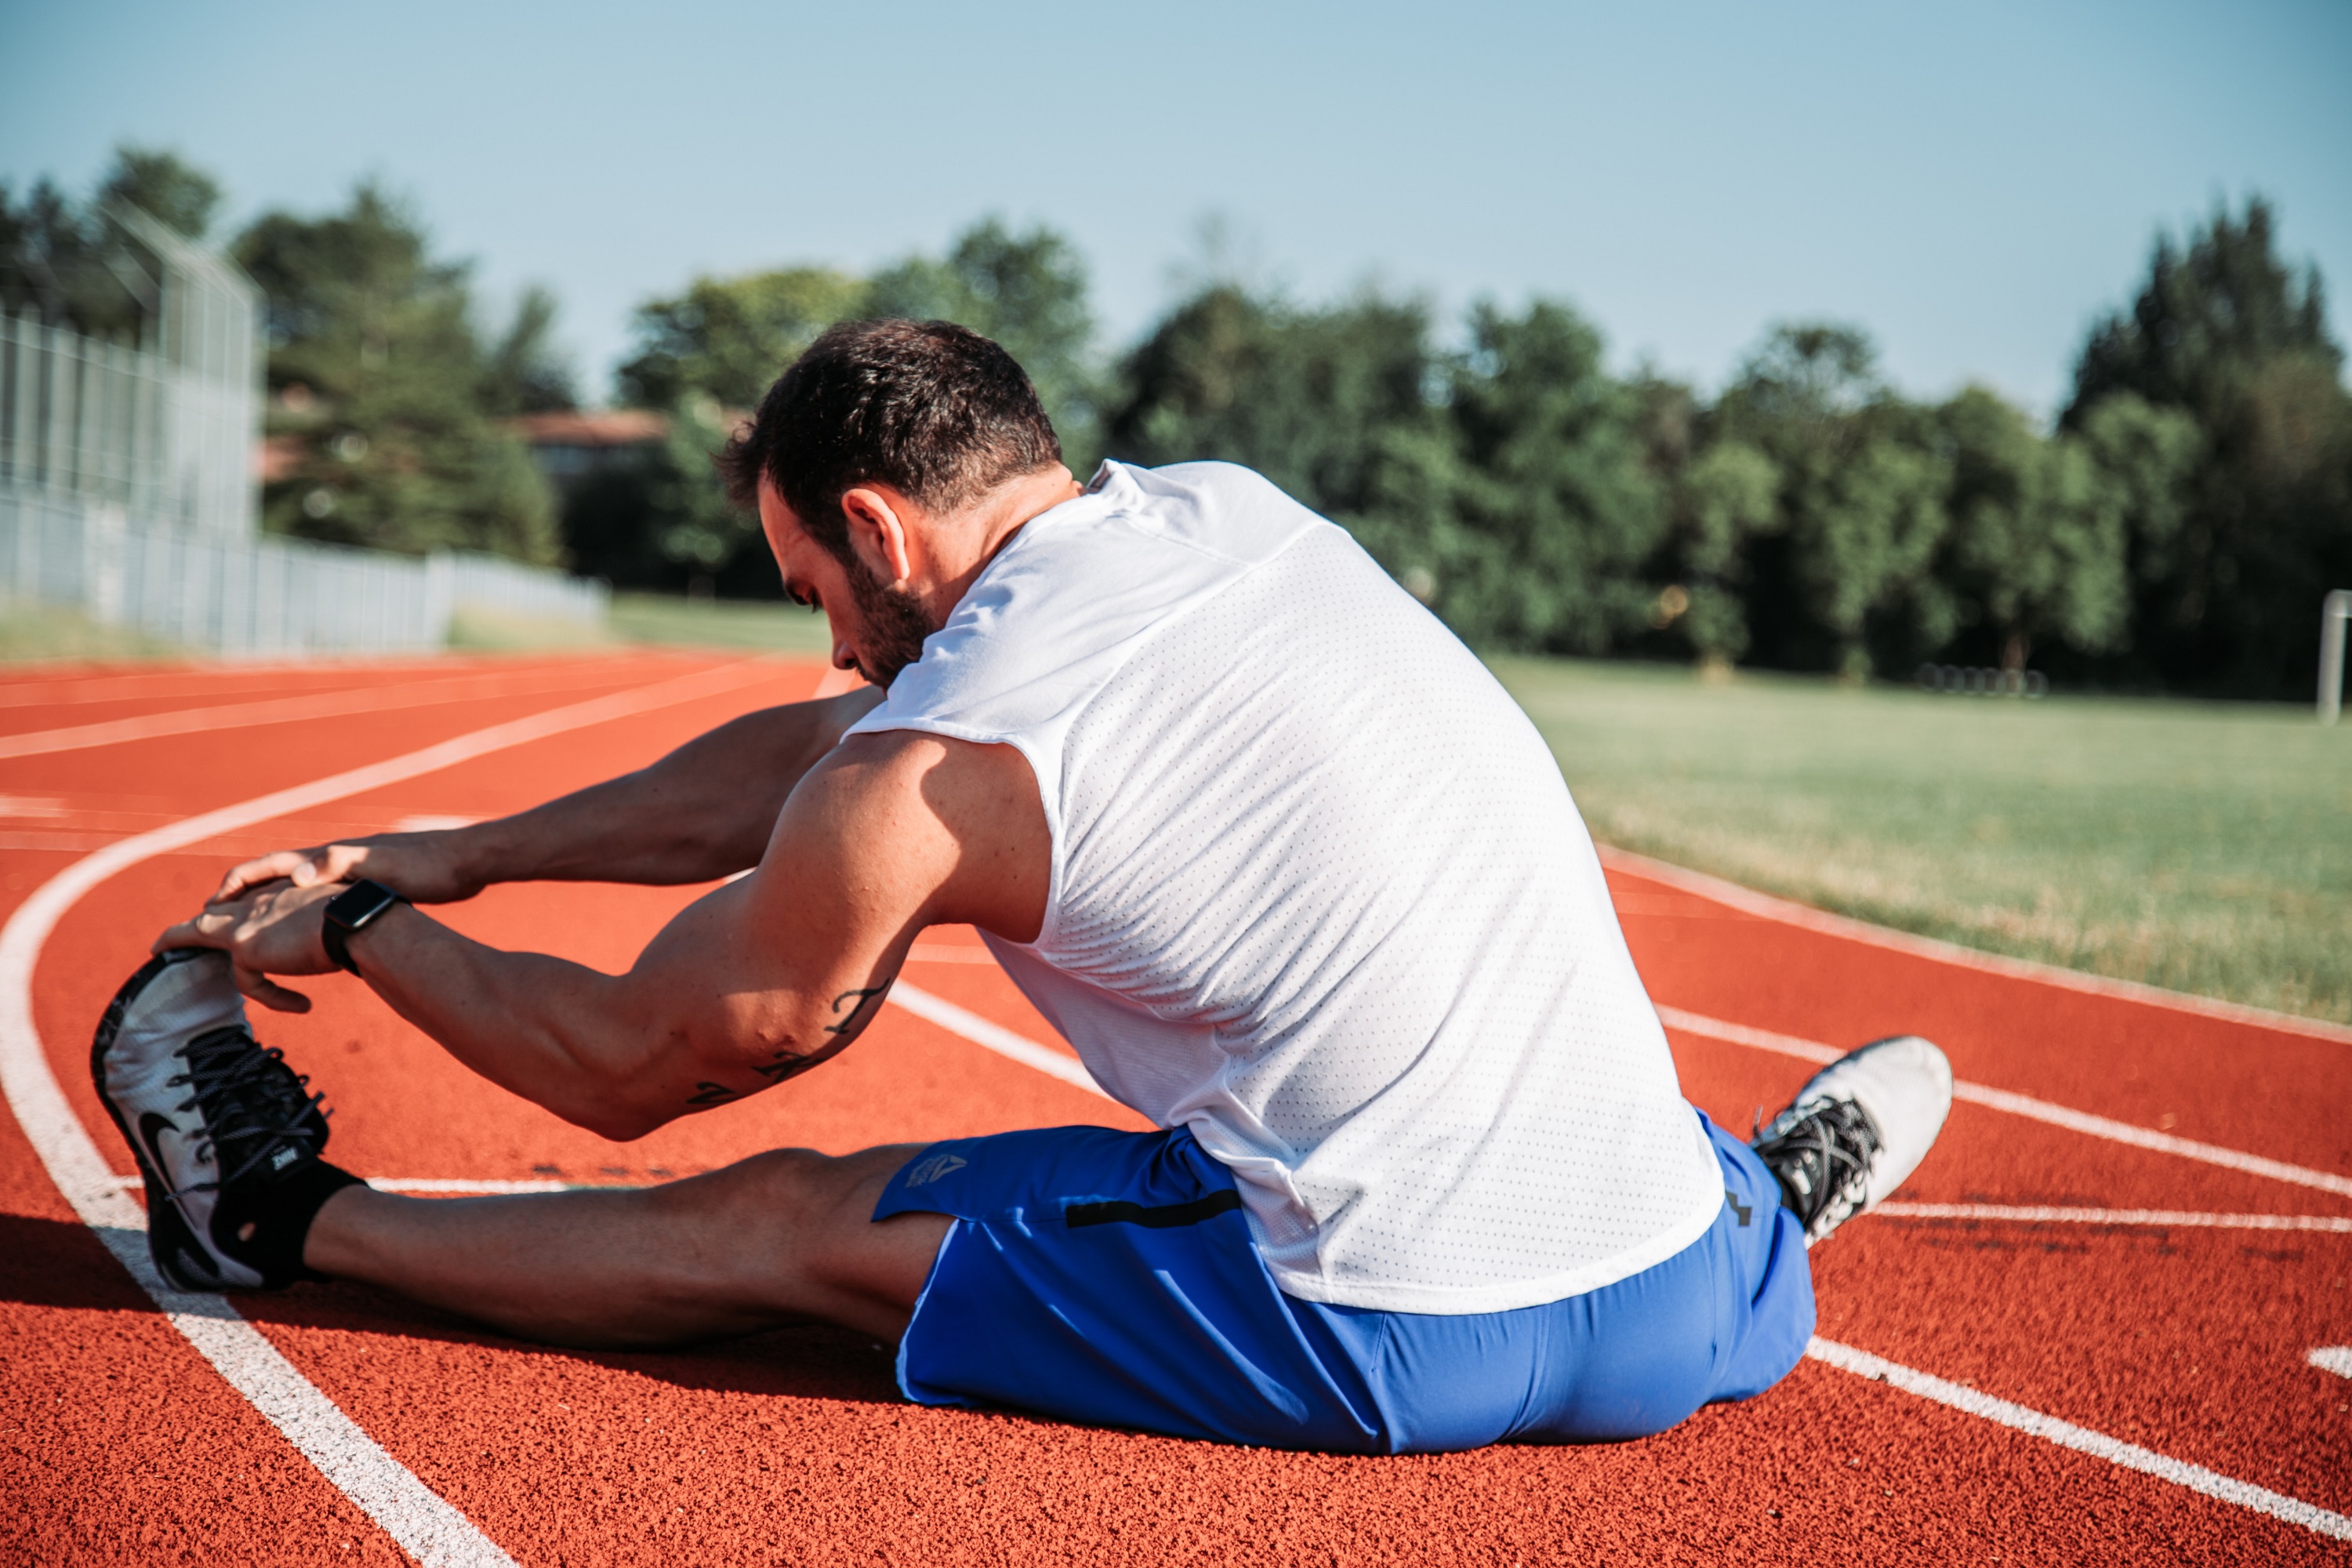 Adult Sports Injury Types, Treatment, Prevention Options - PMIR